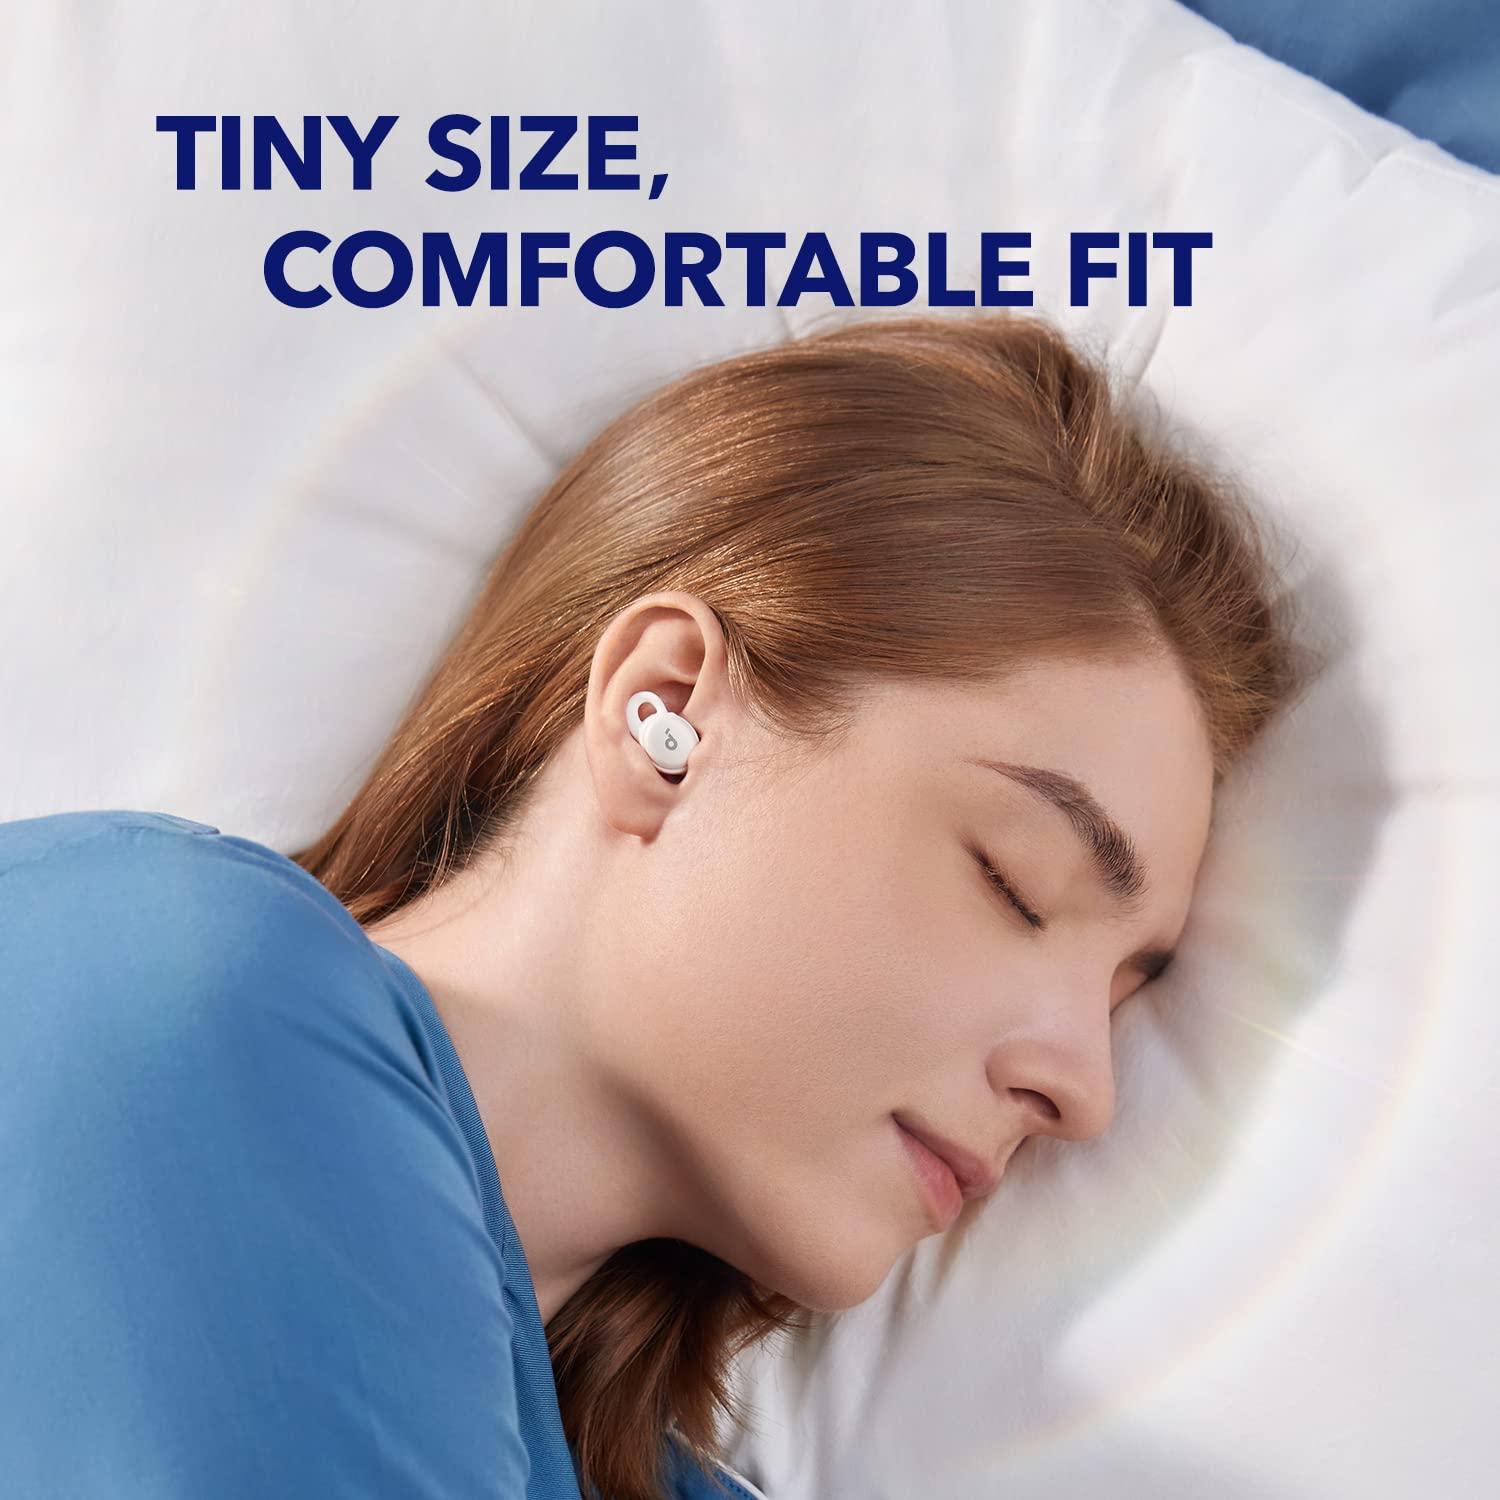 Soundcore by Anker, Sleep A10 Bluetooth Sleep Earbuds, Noise Blocking Earbuds for Sleep, Comfortable Fit, Bluetooth 5.2, App, for Unlimited Sleep Sounds, Sleep Monitor, Personal Alarm, Side Sleeper